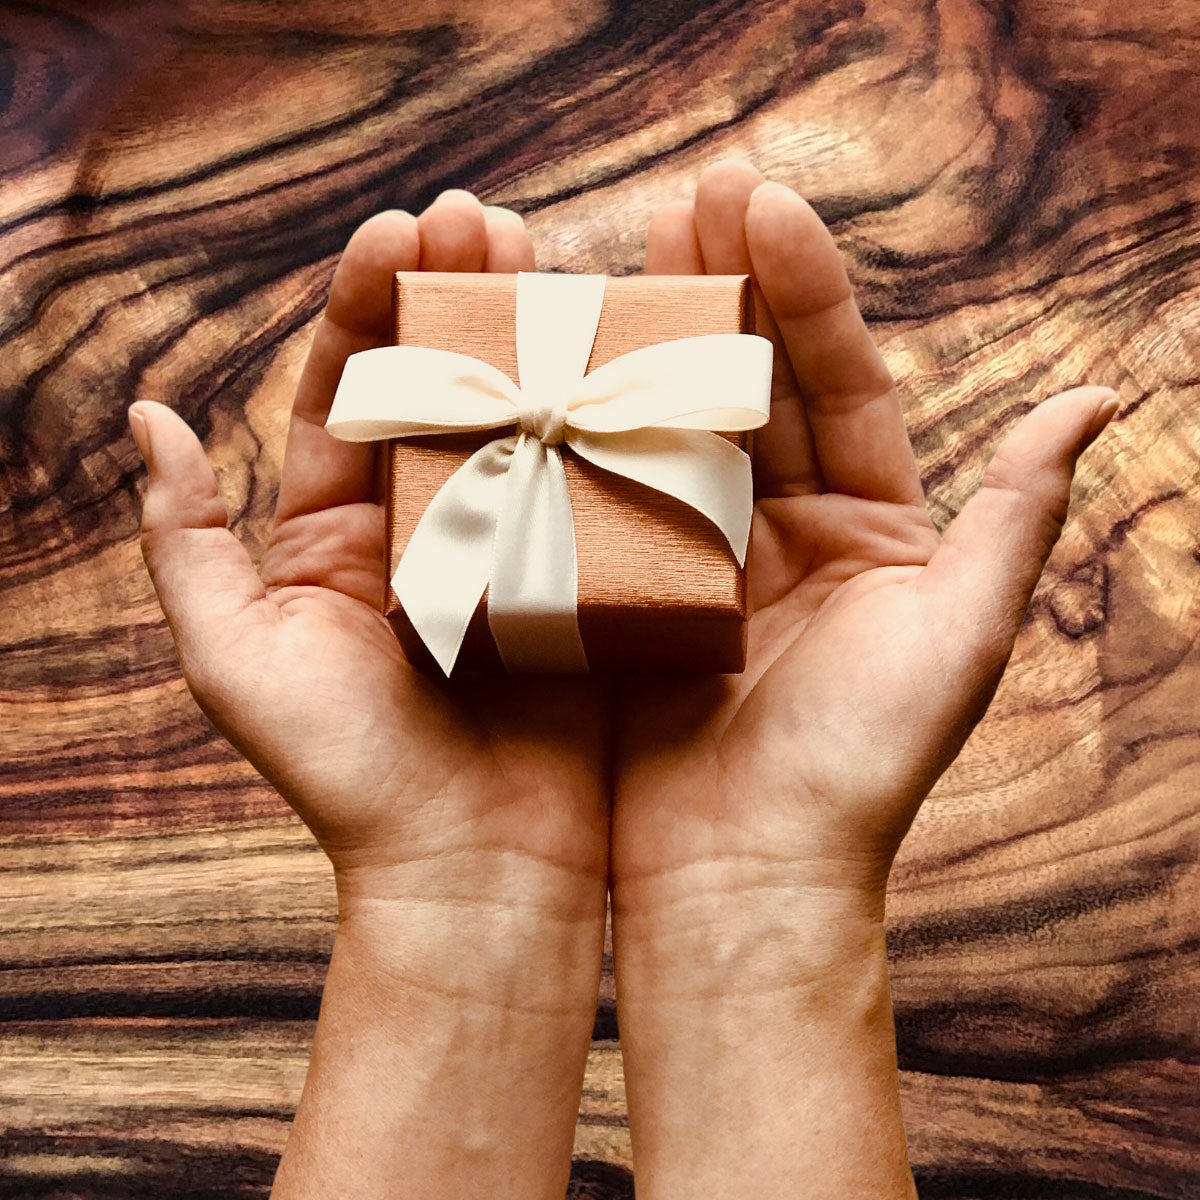 Two hands holding a small wrapped gift box with a bow, with beautiful camphor laurel timber as the background. 